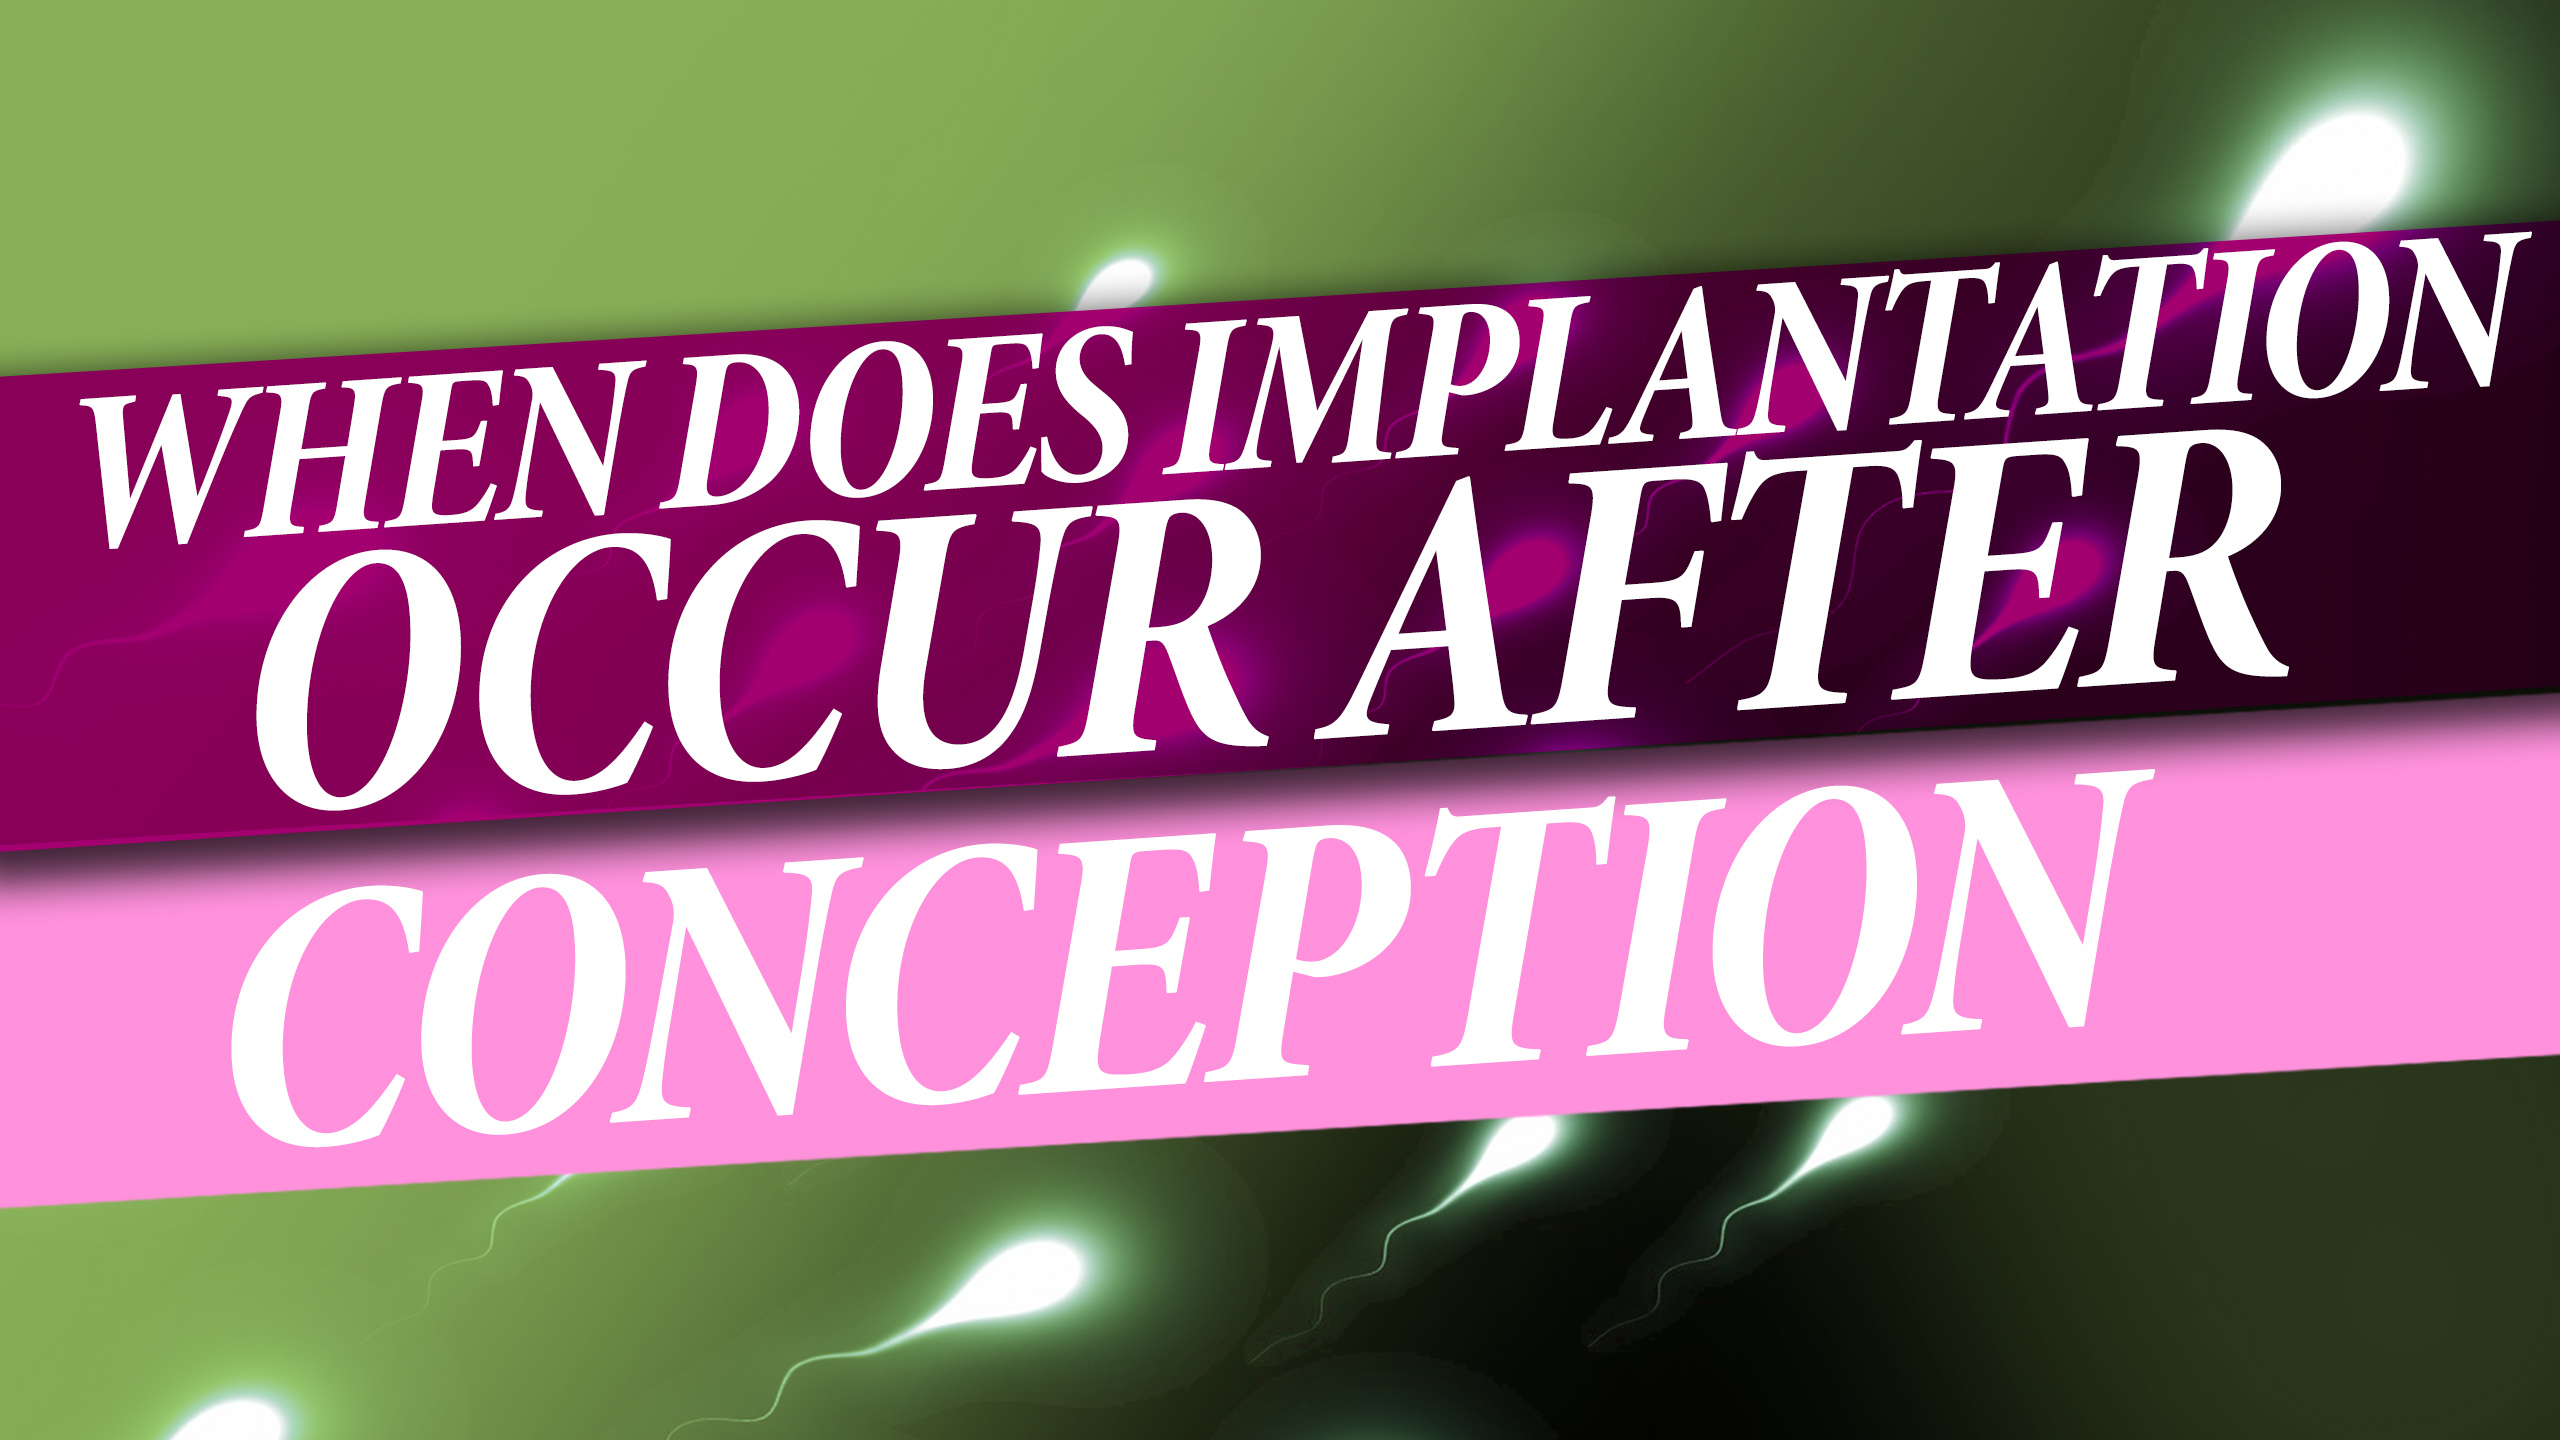 When Does Implantation Occur After Conception